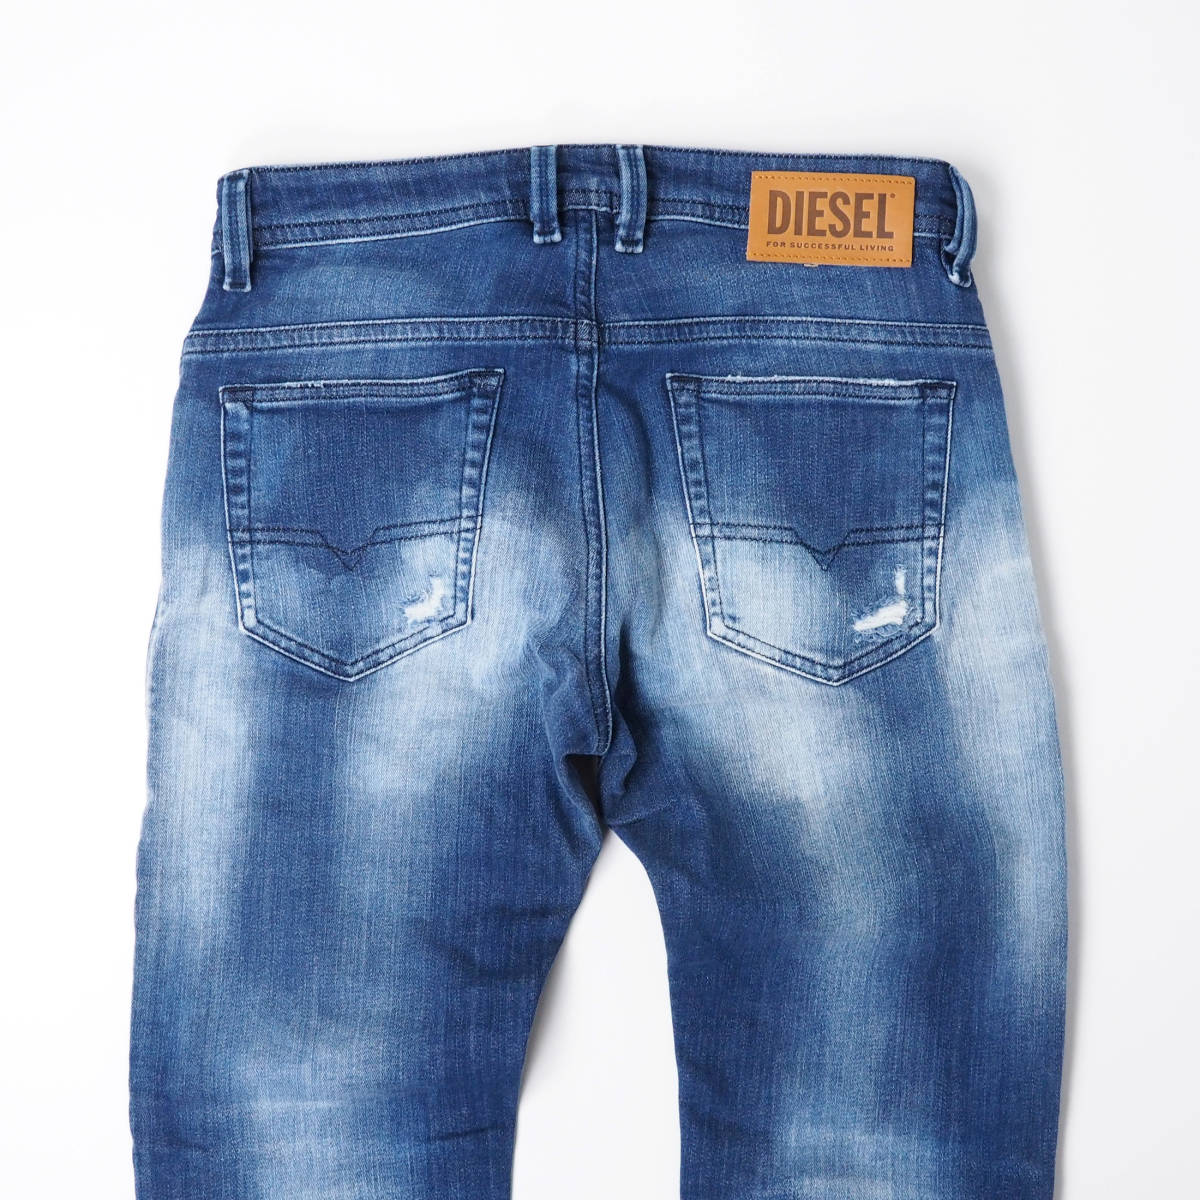 DIESEL ディーゼル THOMMER-T JOGG JEANS